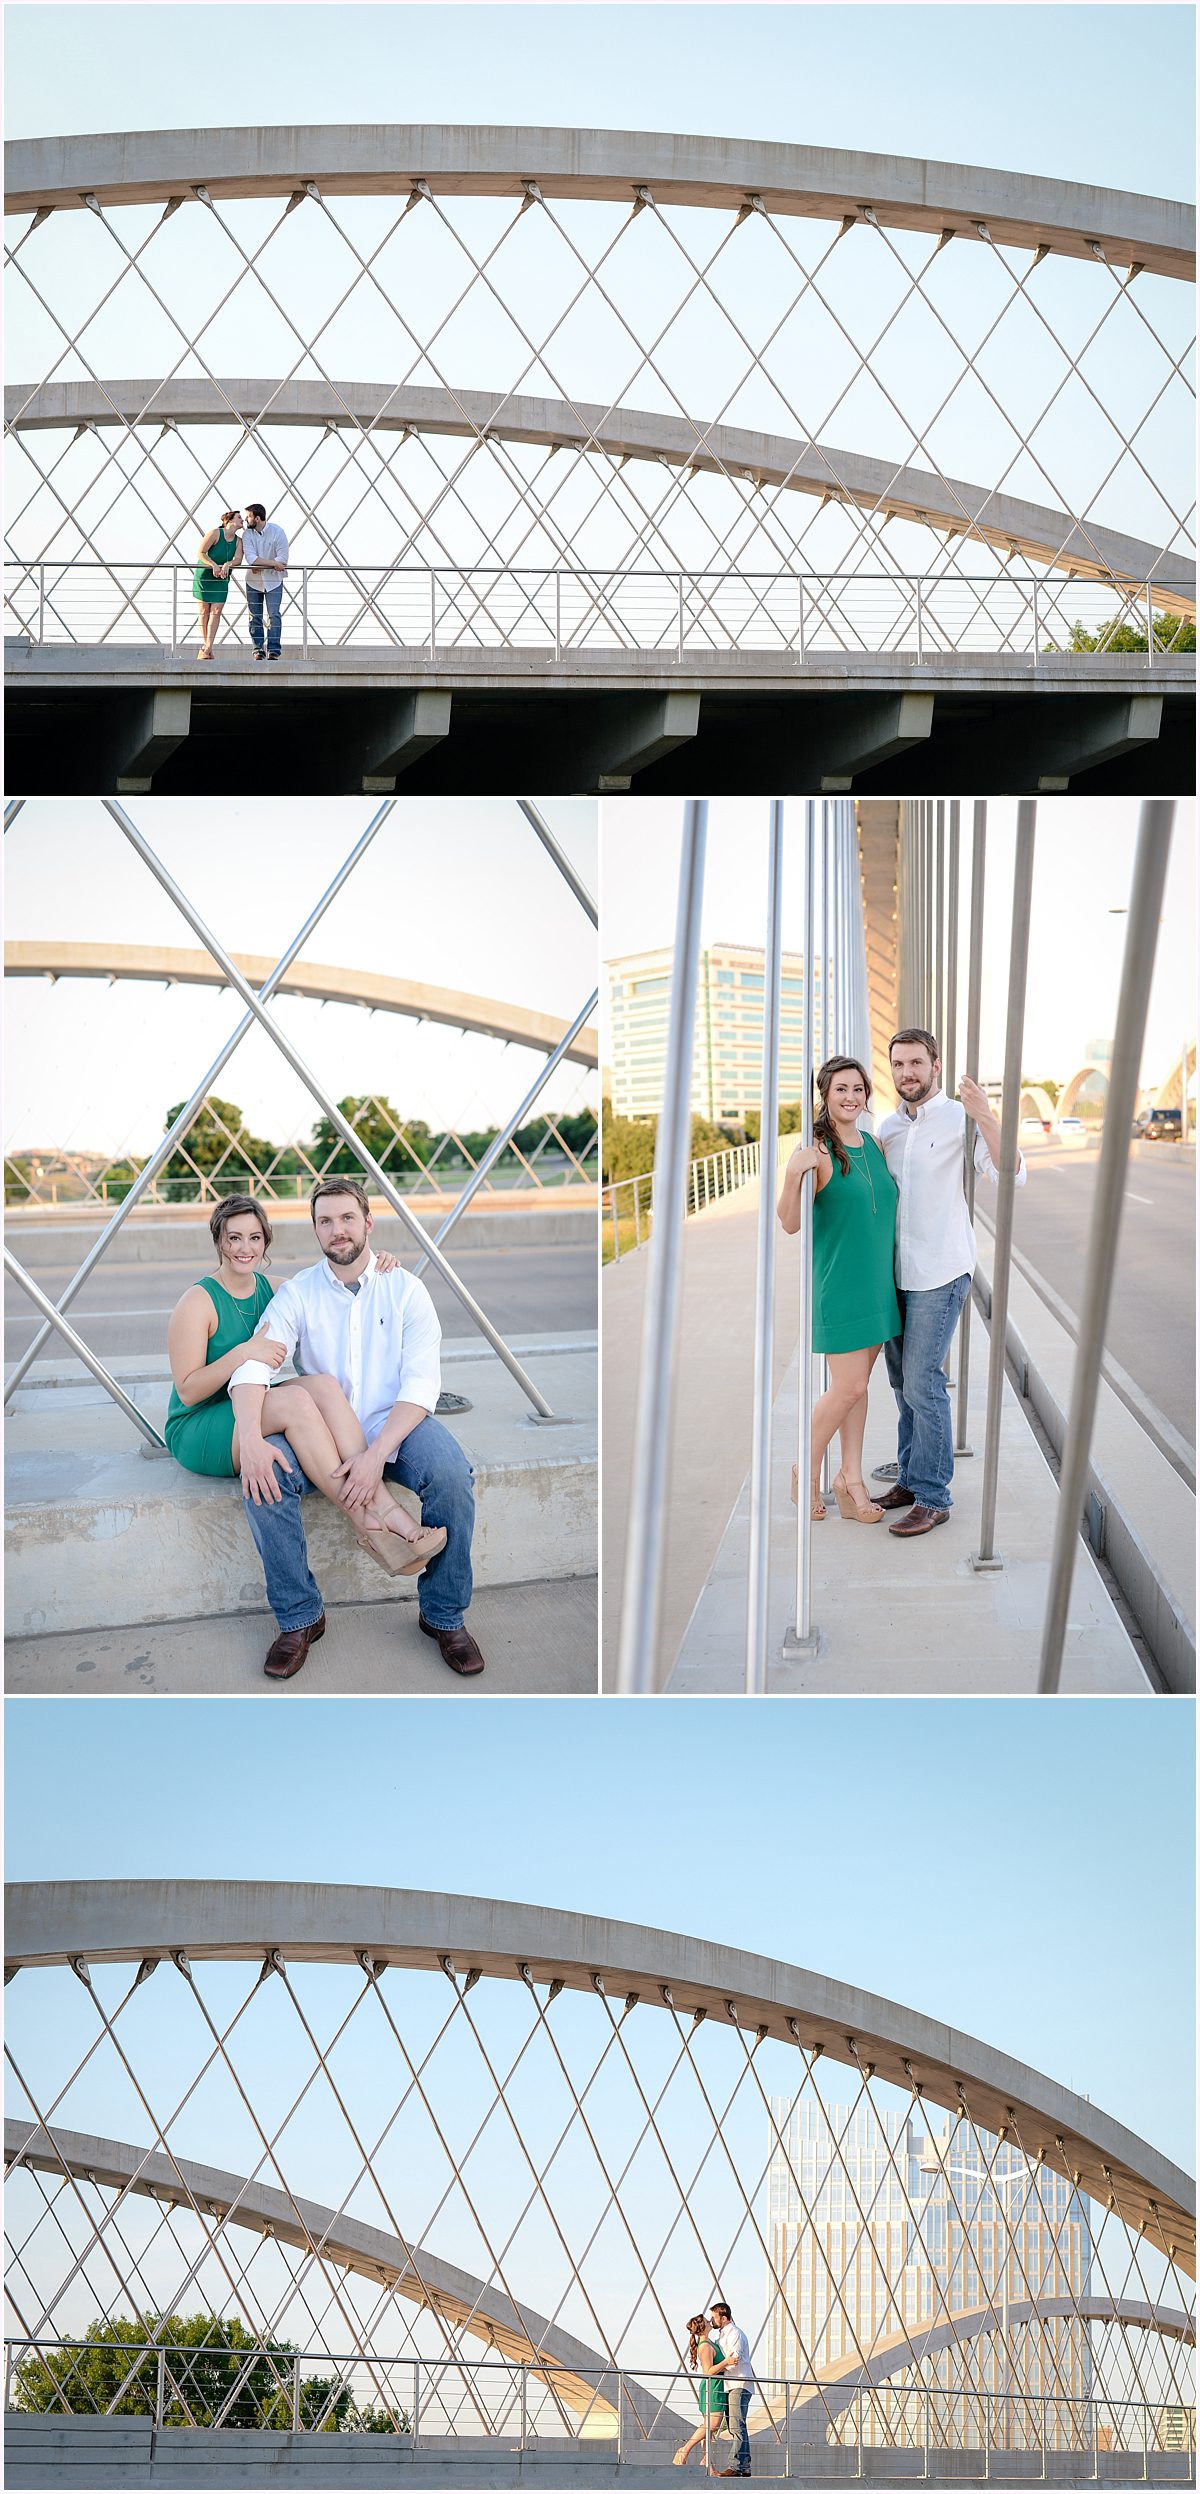 Engagement session photos in Fort Worth at Trinity Park and West 7th Bridge